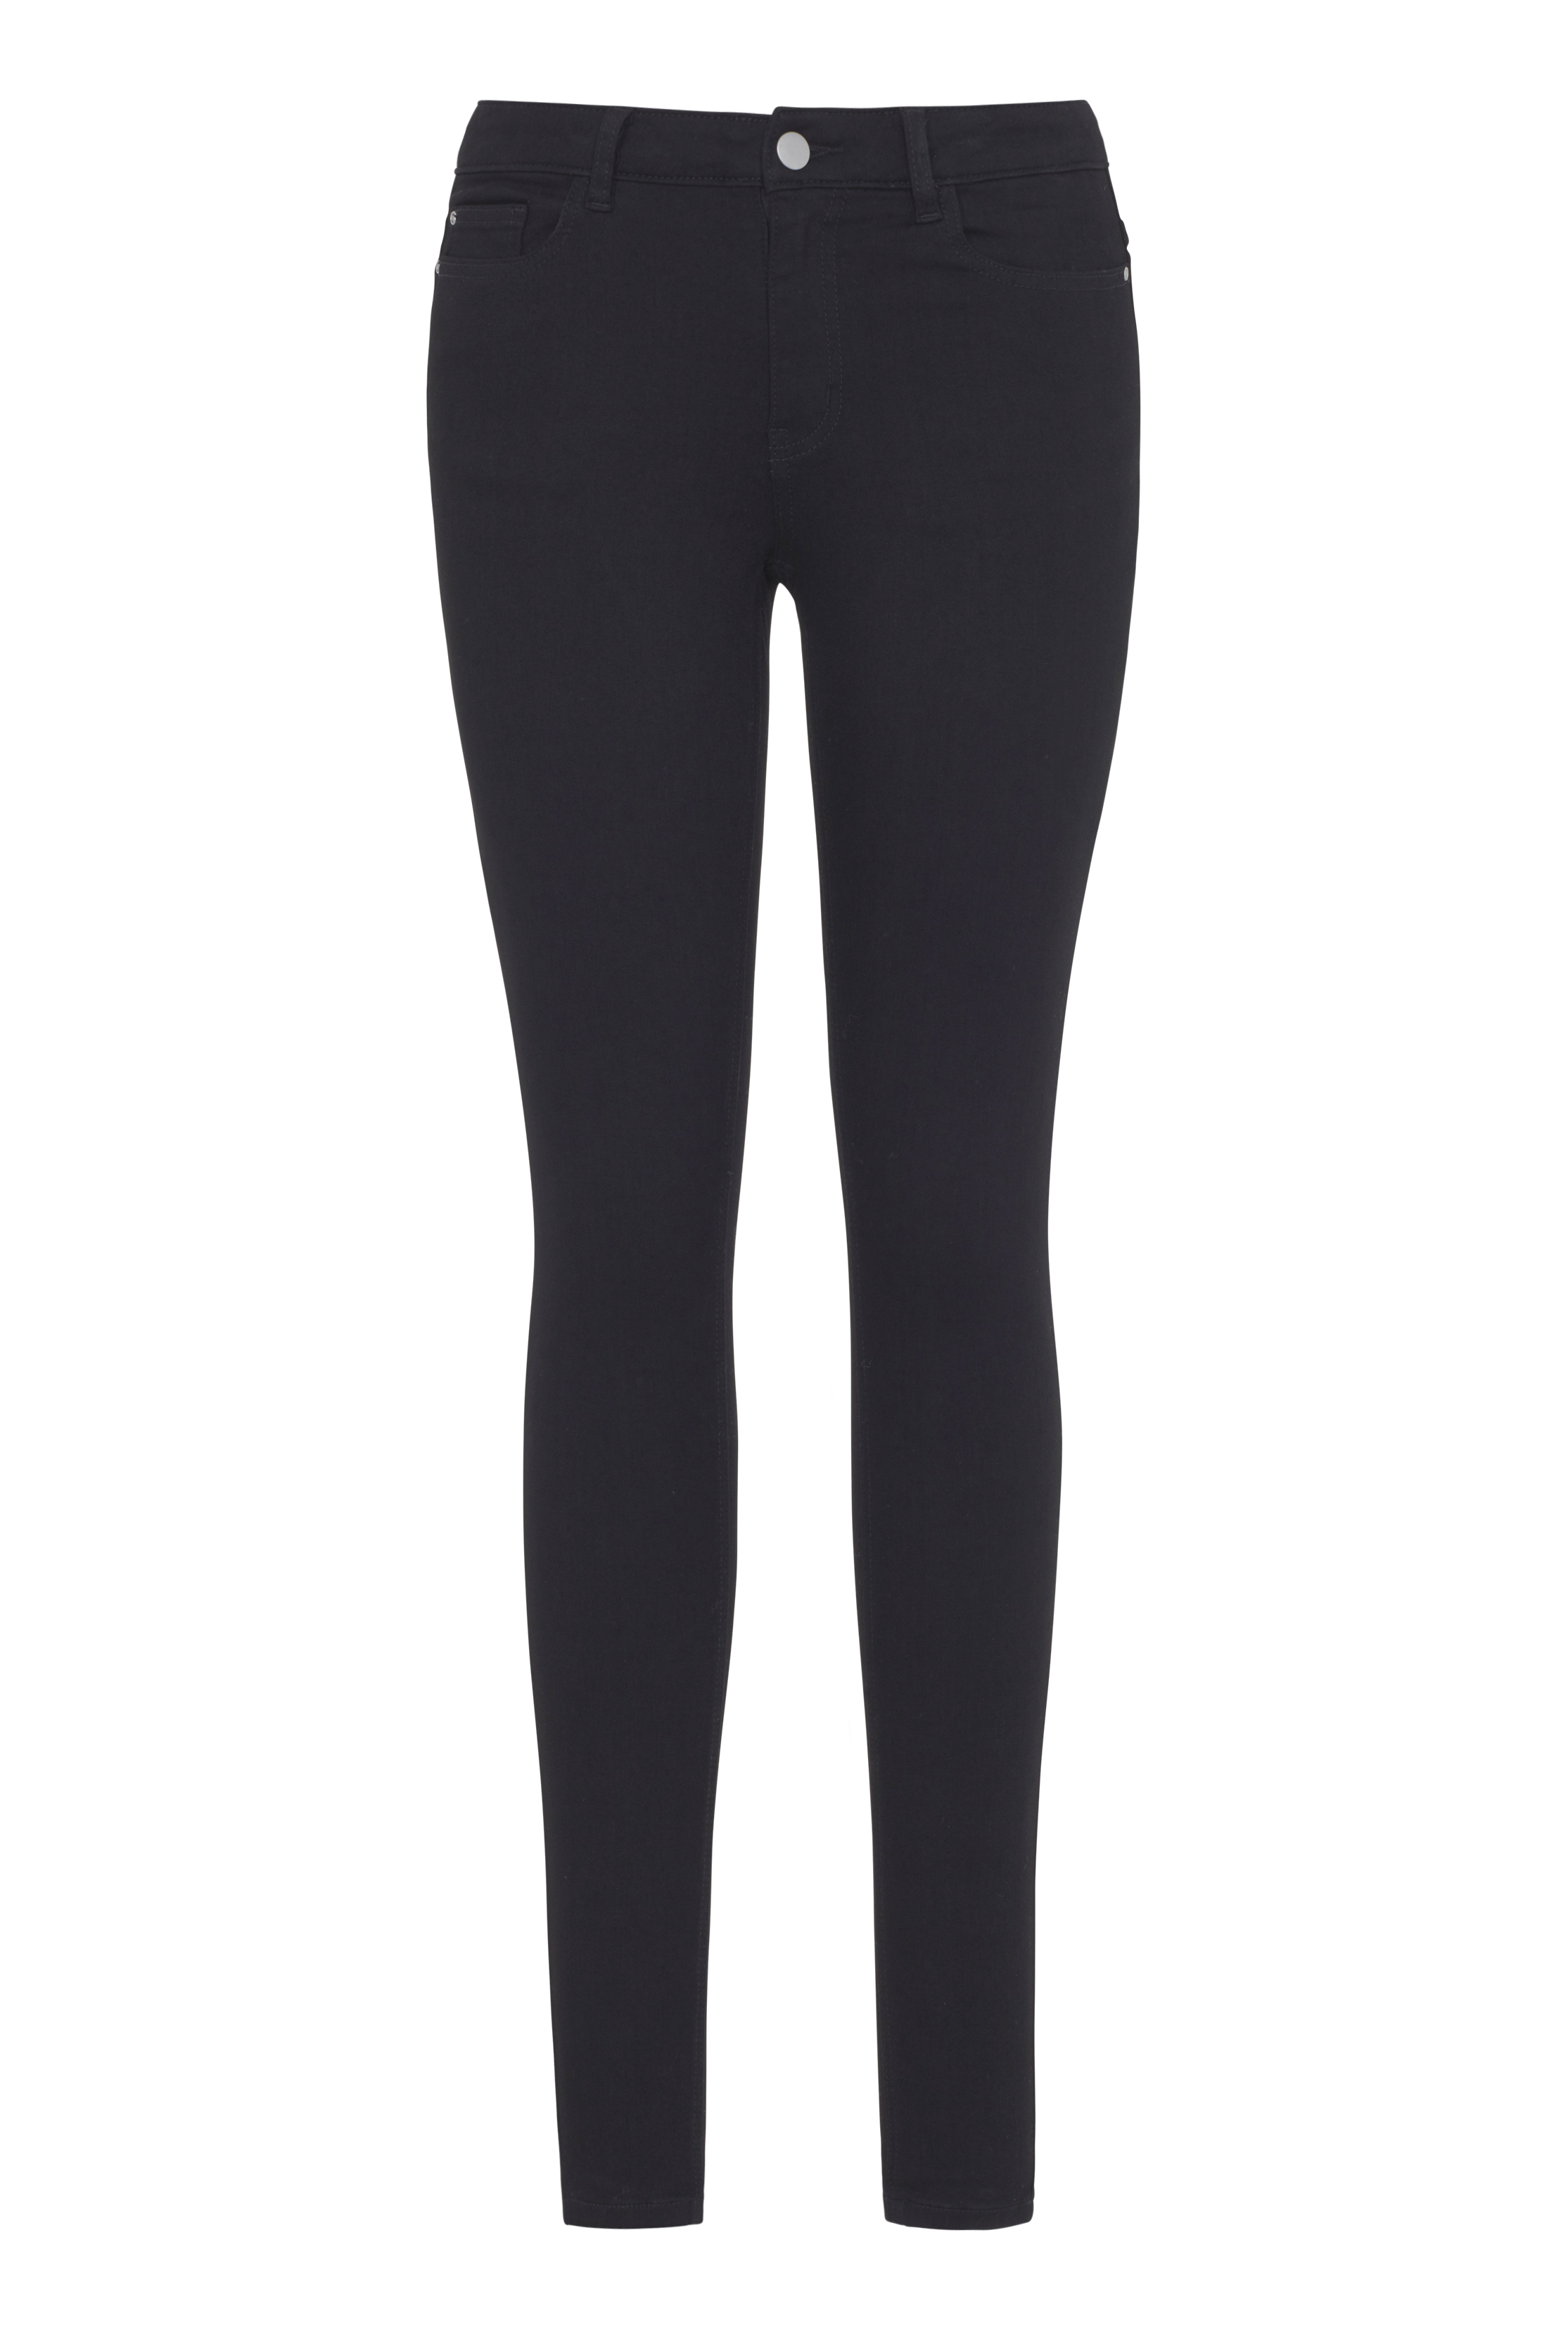 Black Skinny Low Rise Jeans | Long Tall Sally